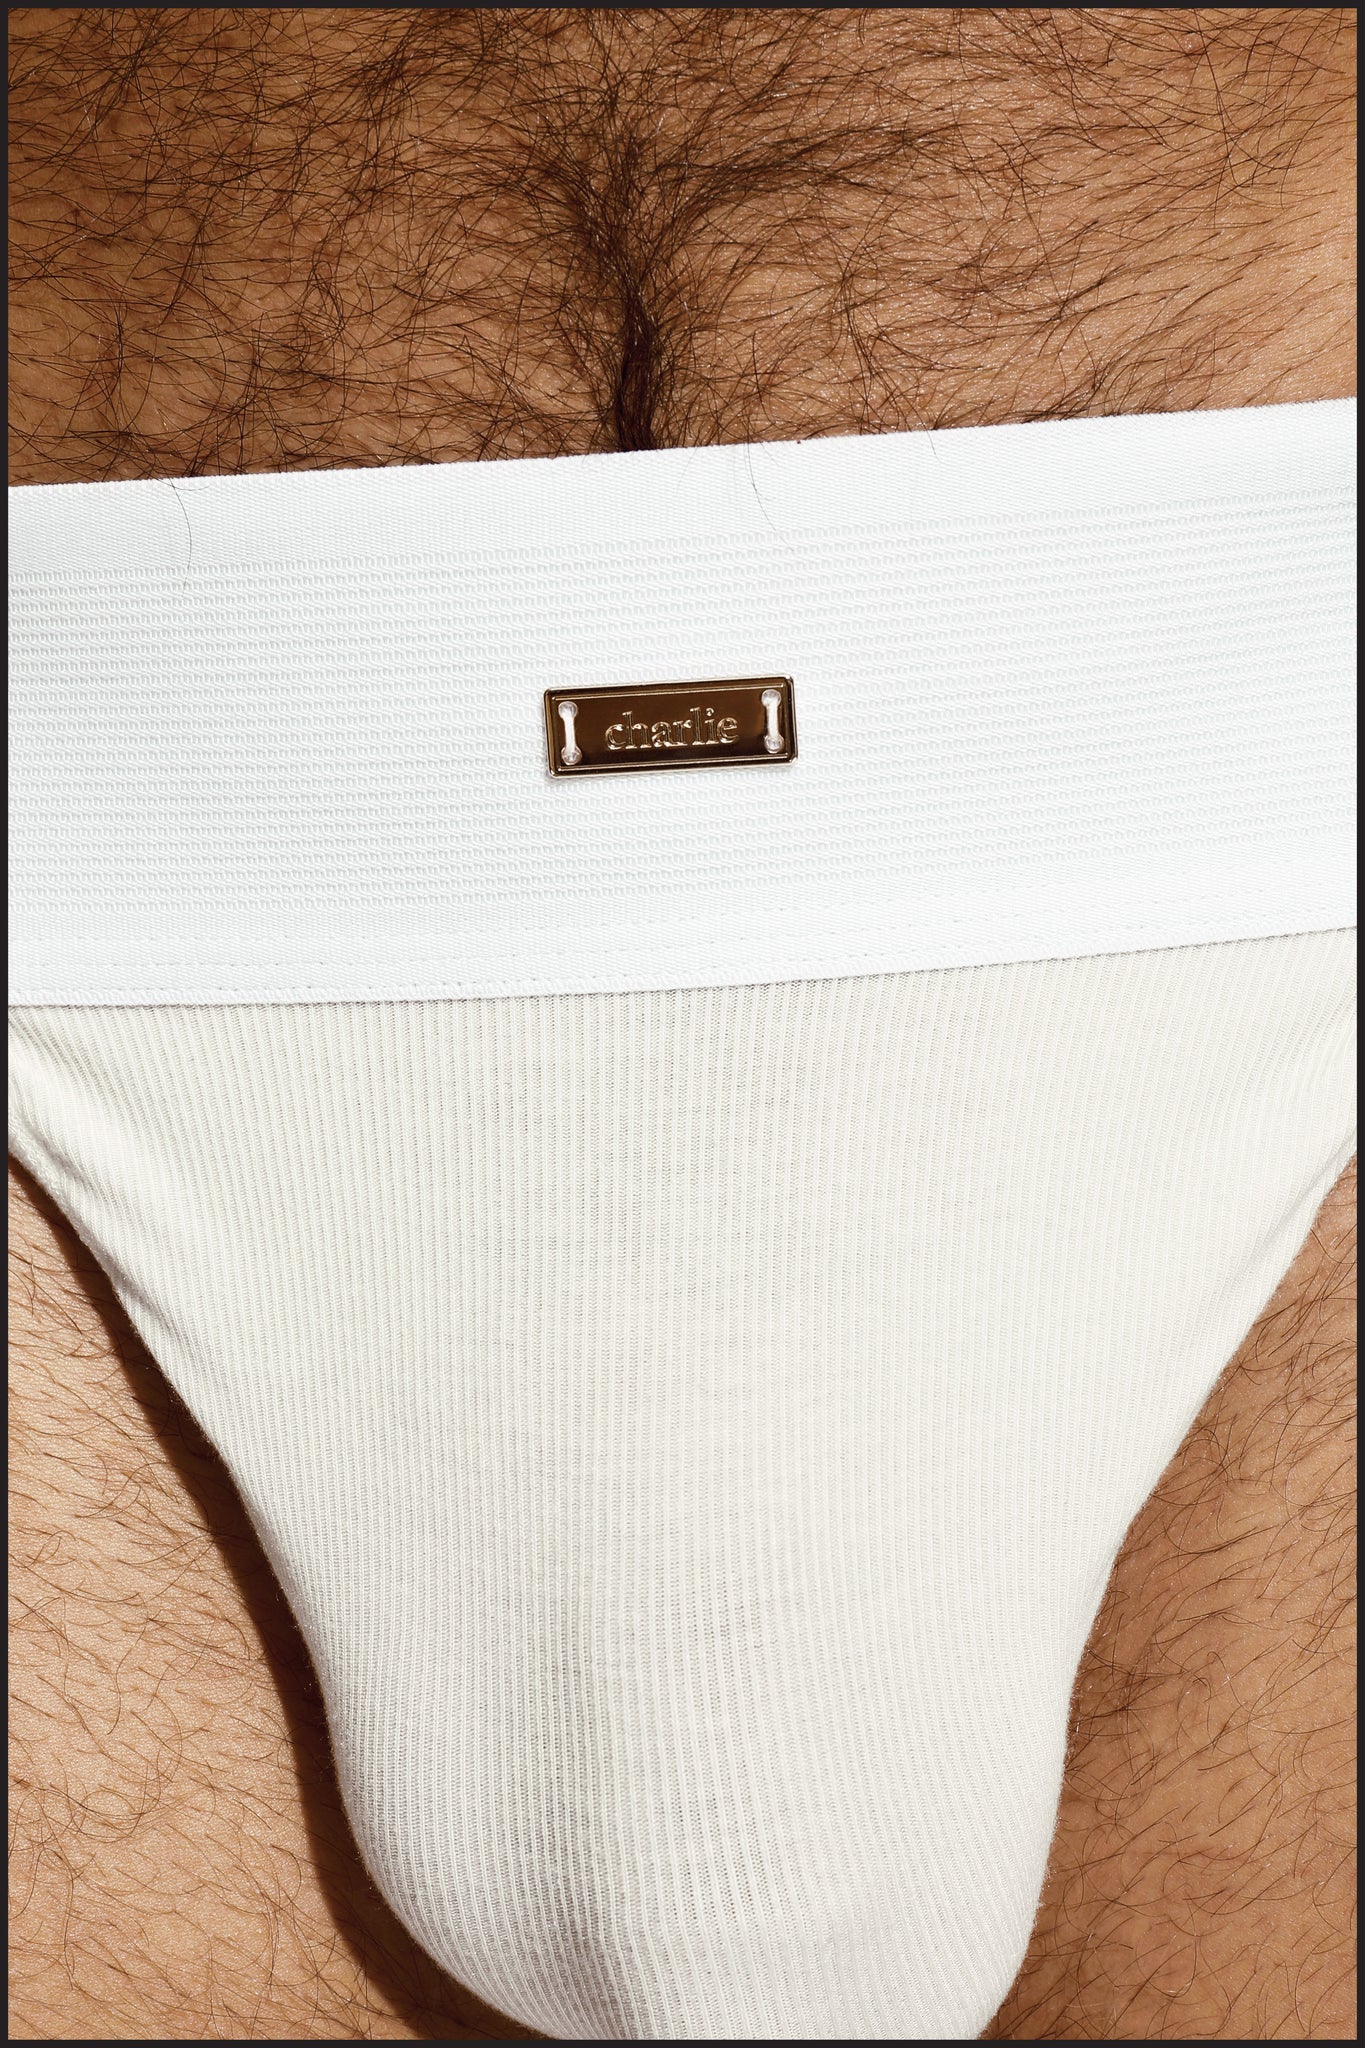 Pro Thong - GOLD LABEL